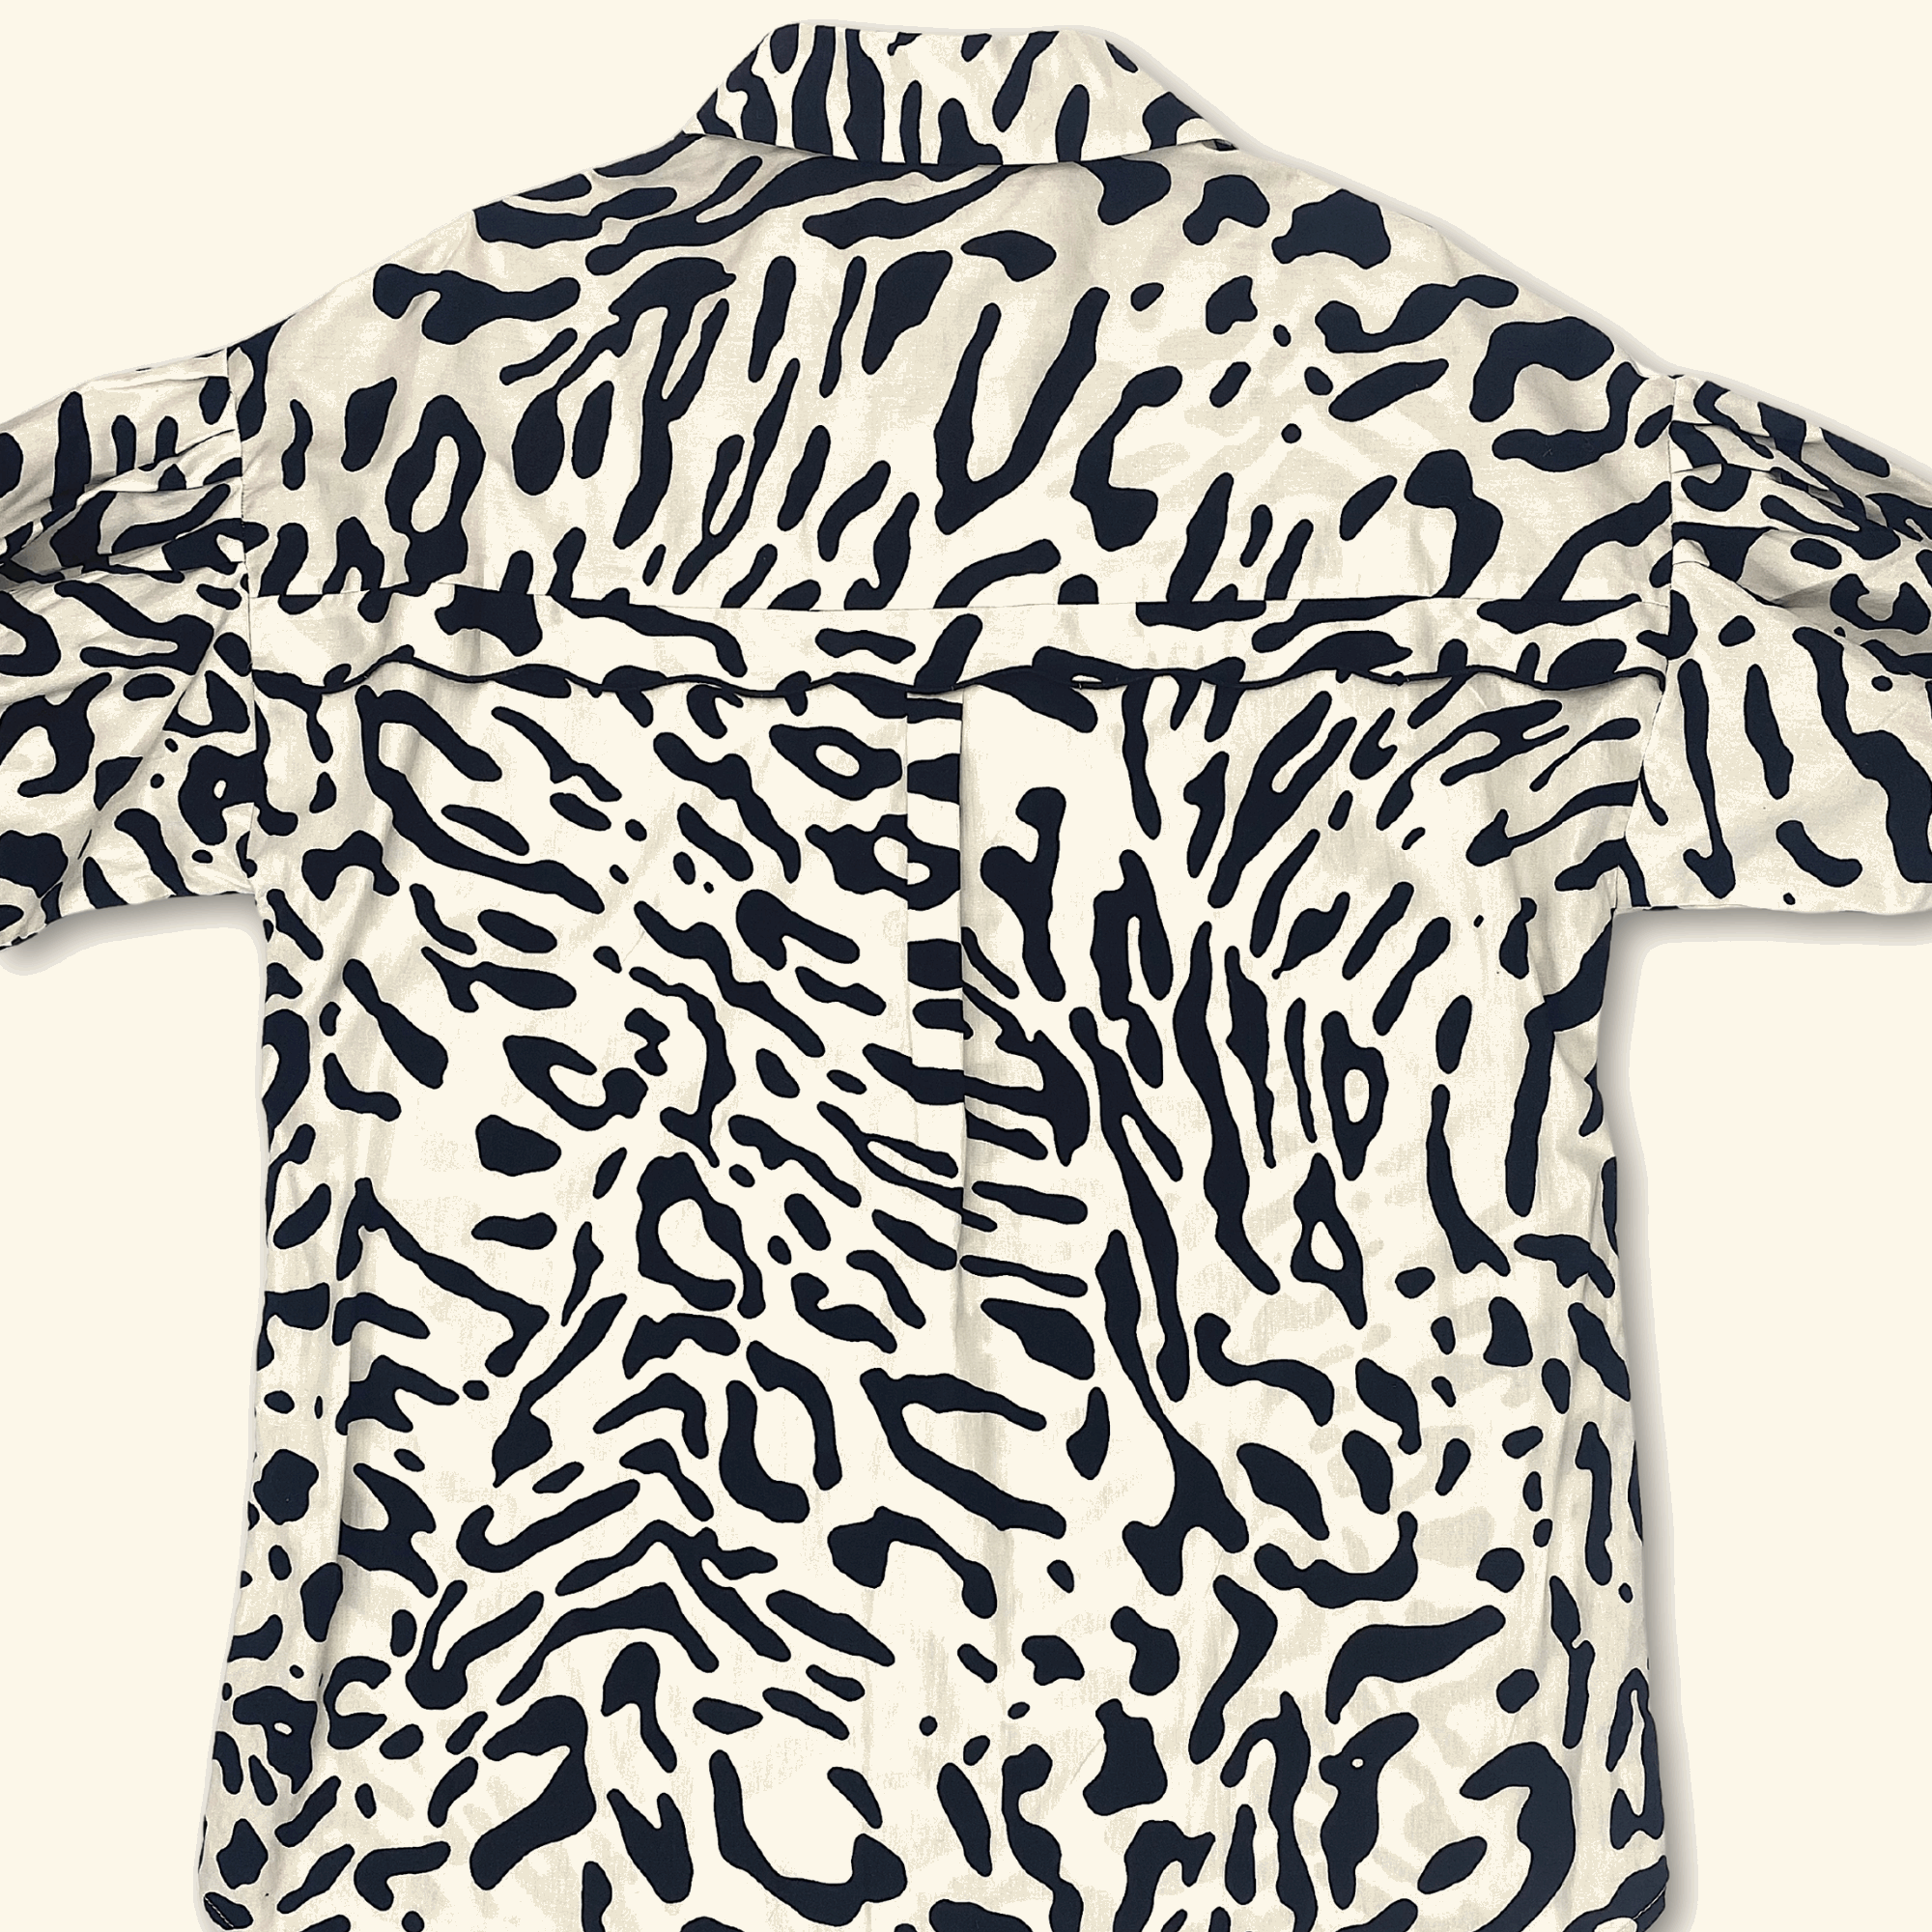 Topshop Patterned Black and White Oversized Shirt - Size Small - Topshop - Tops &amp; Shirts